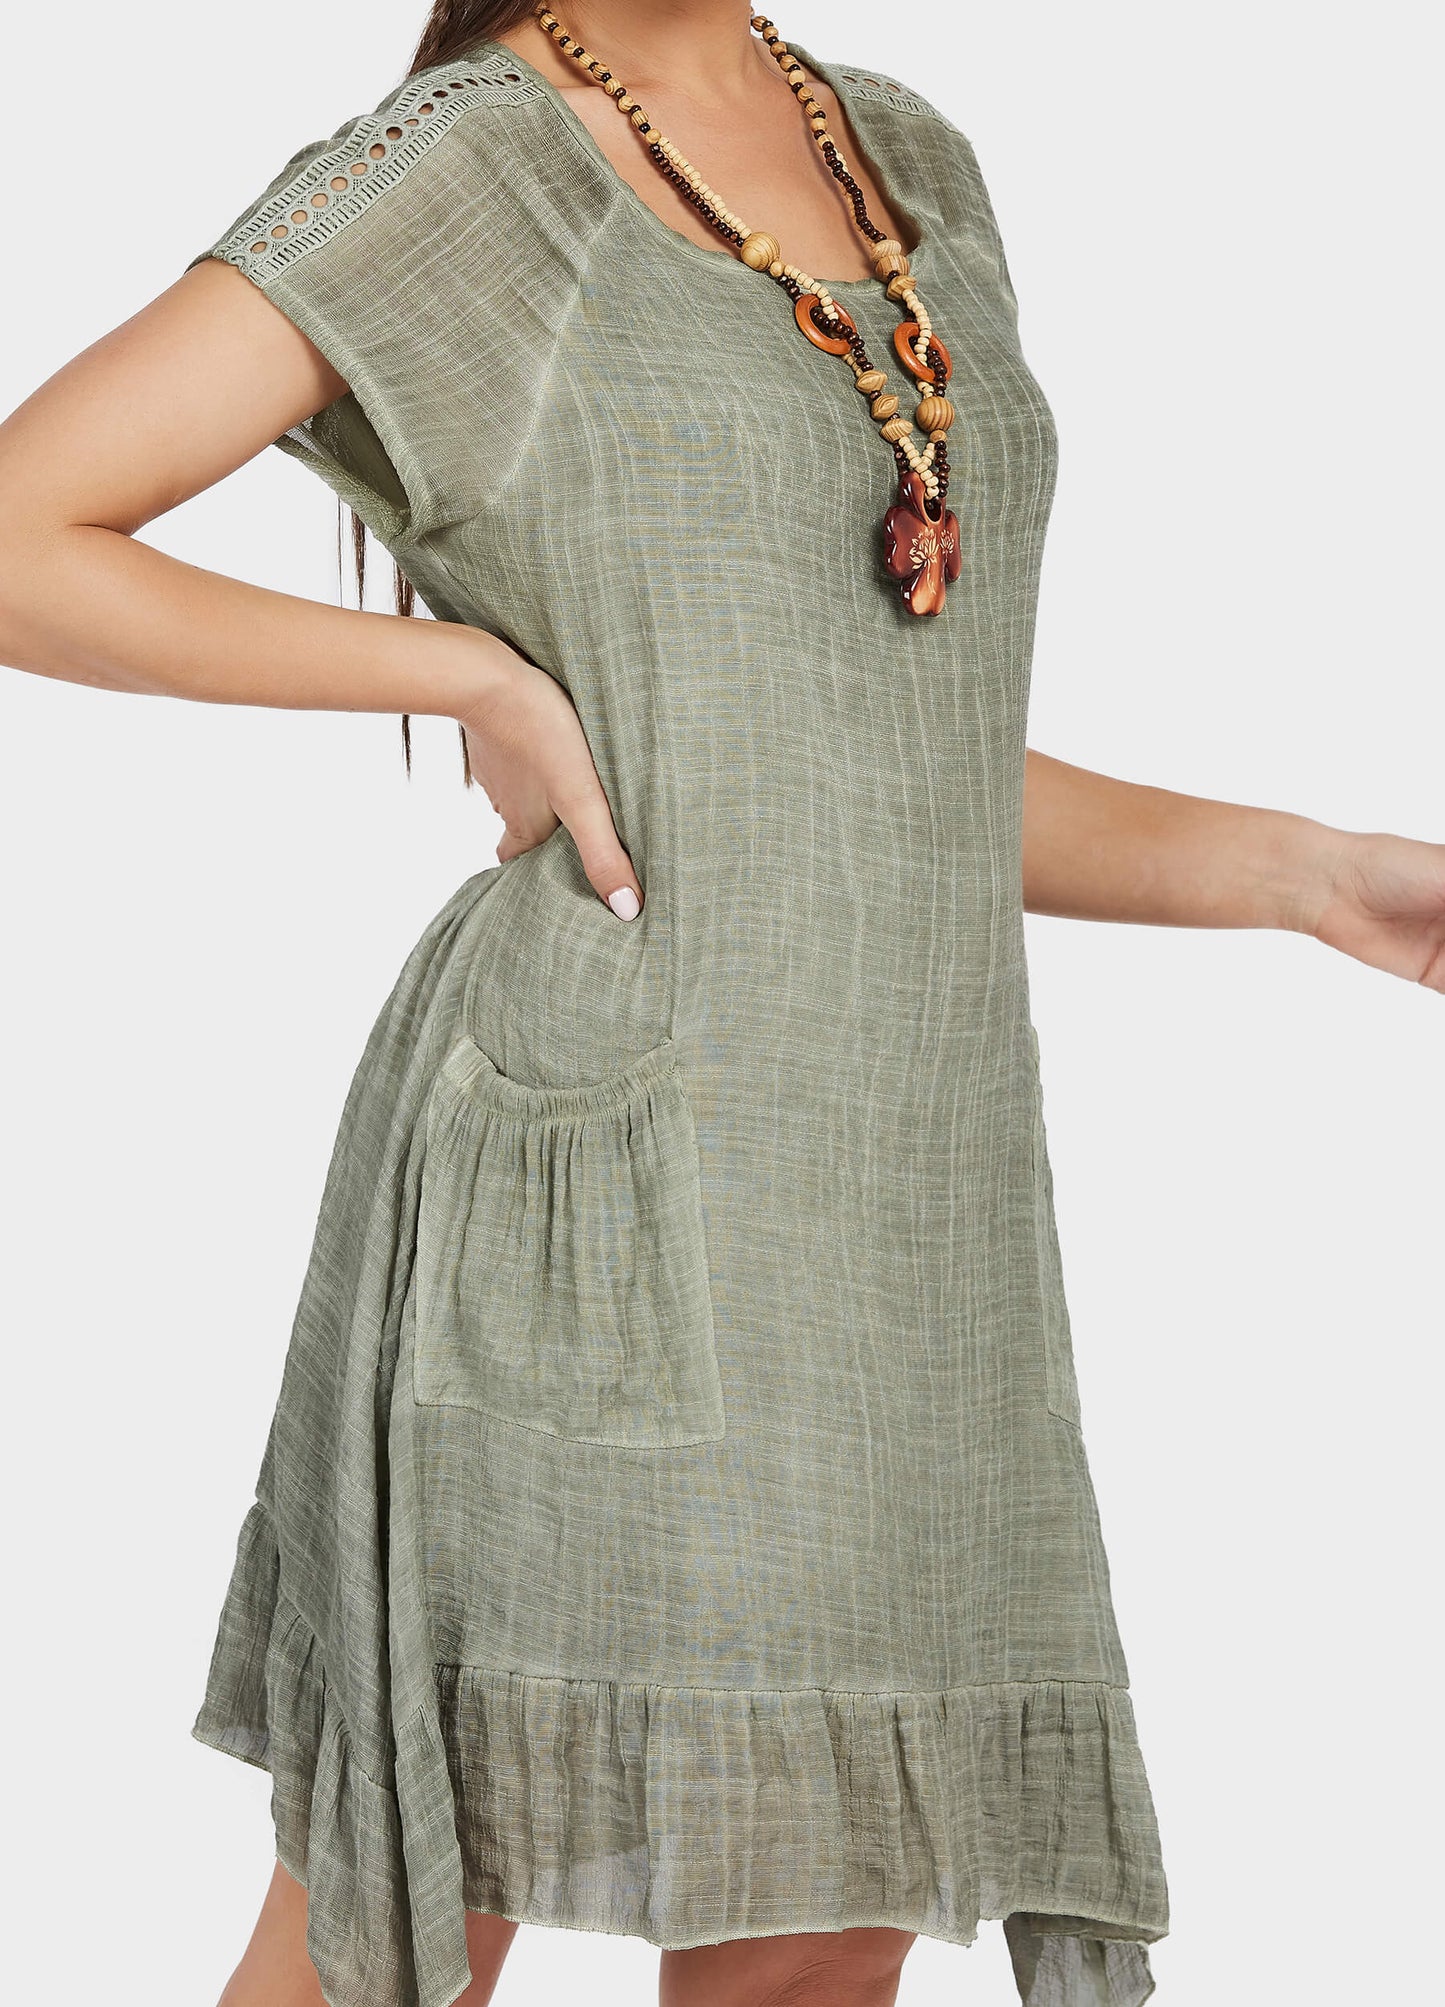 MECALA Women's Linen Scoop Neck Short Sleeve Dress with Wooden Four Leaves Clover Necklace-Green